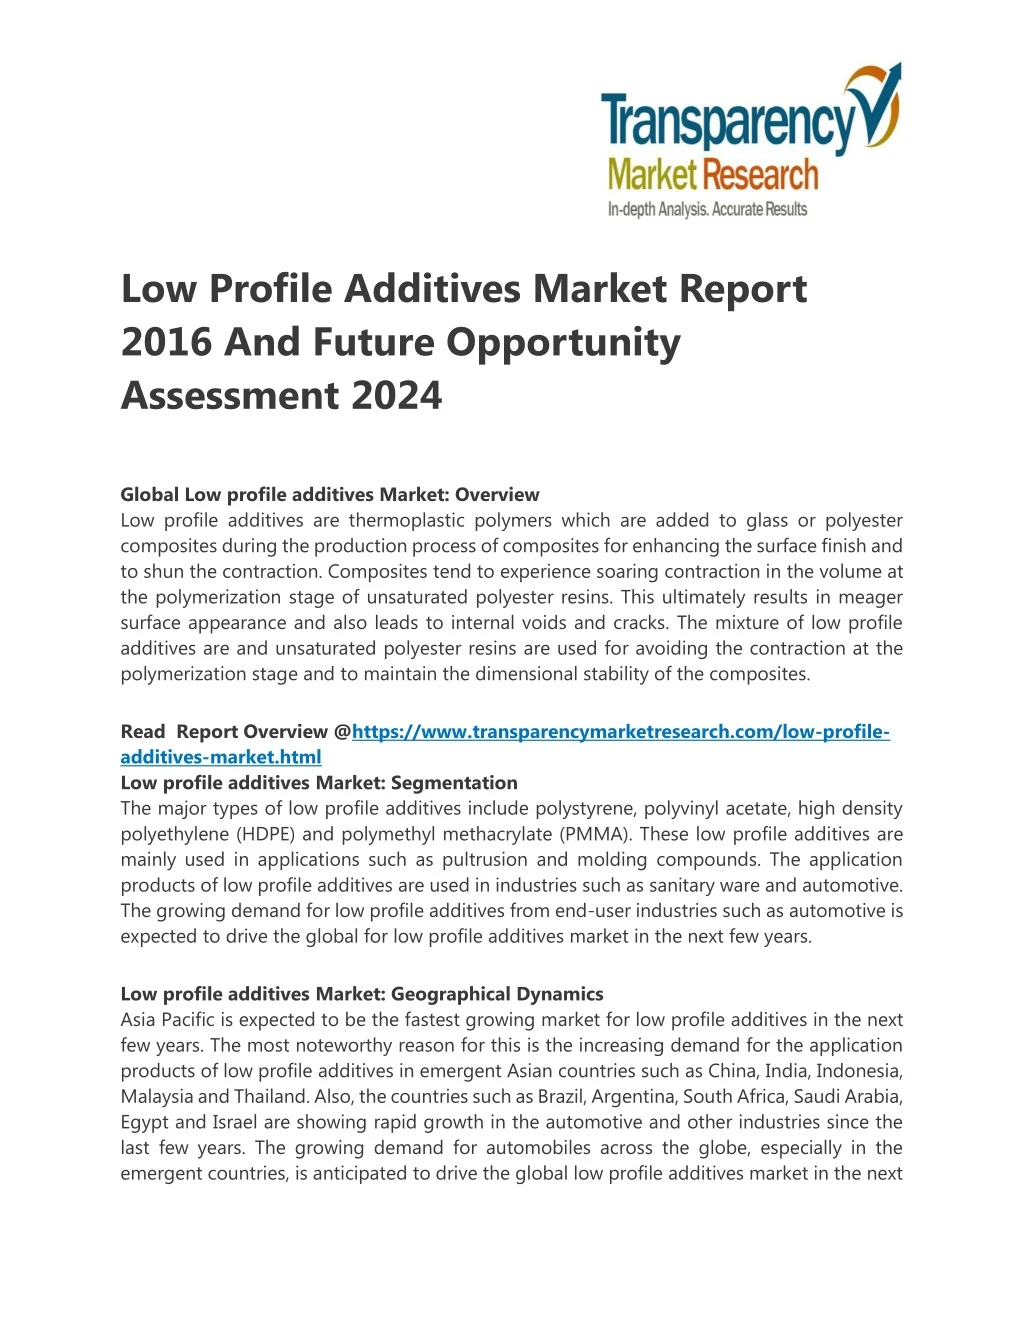 low profile additives market report 2016